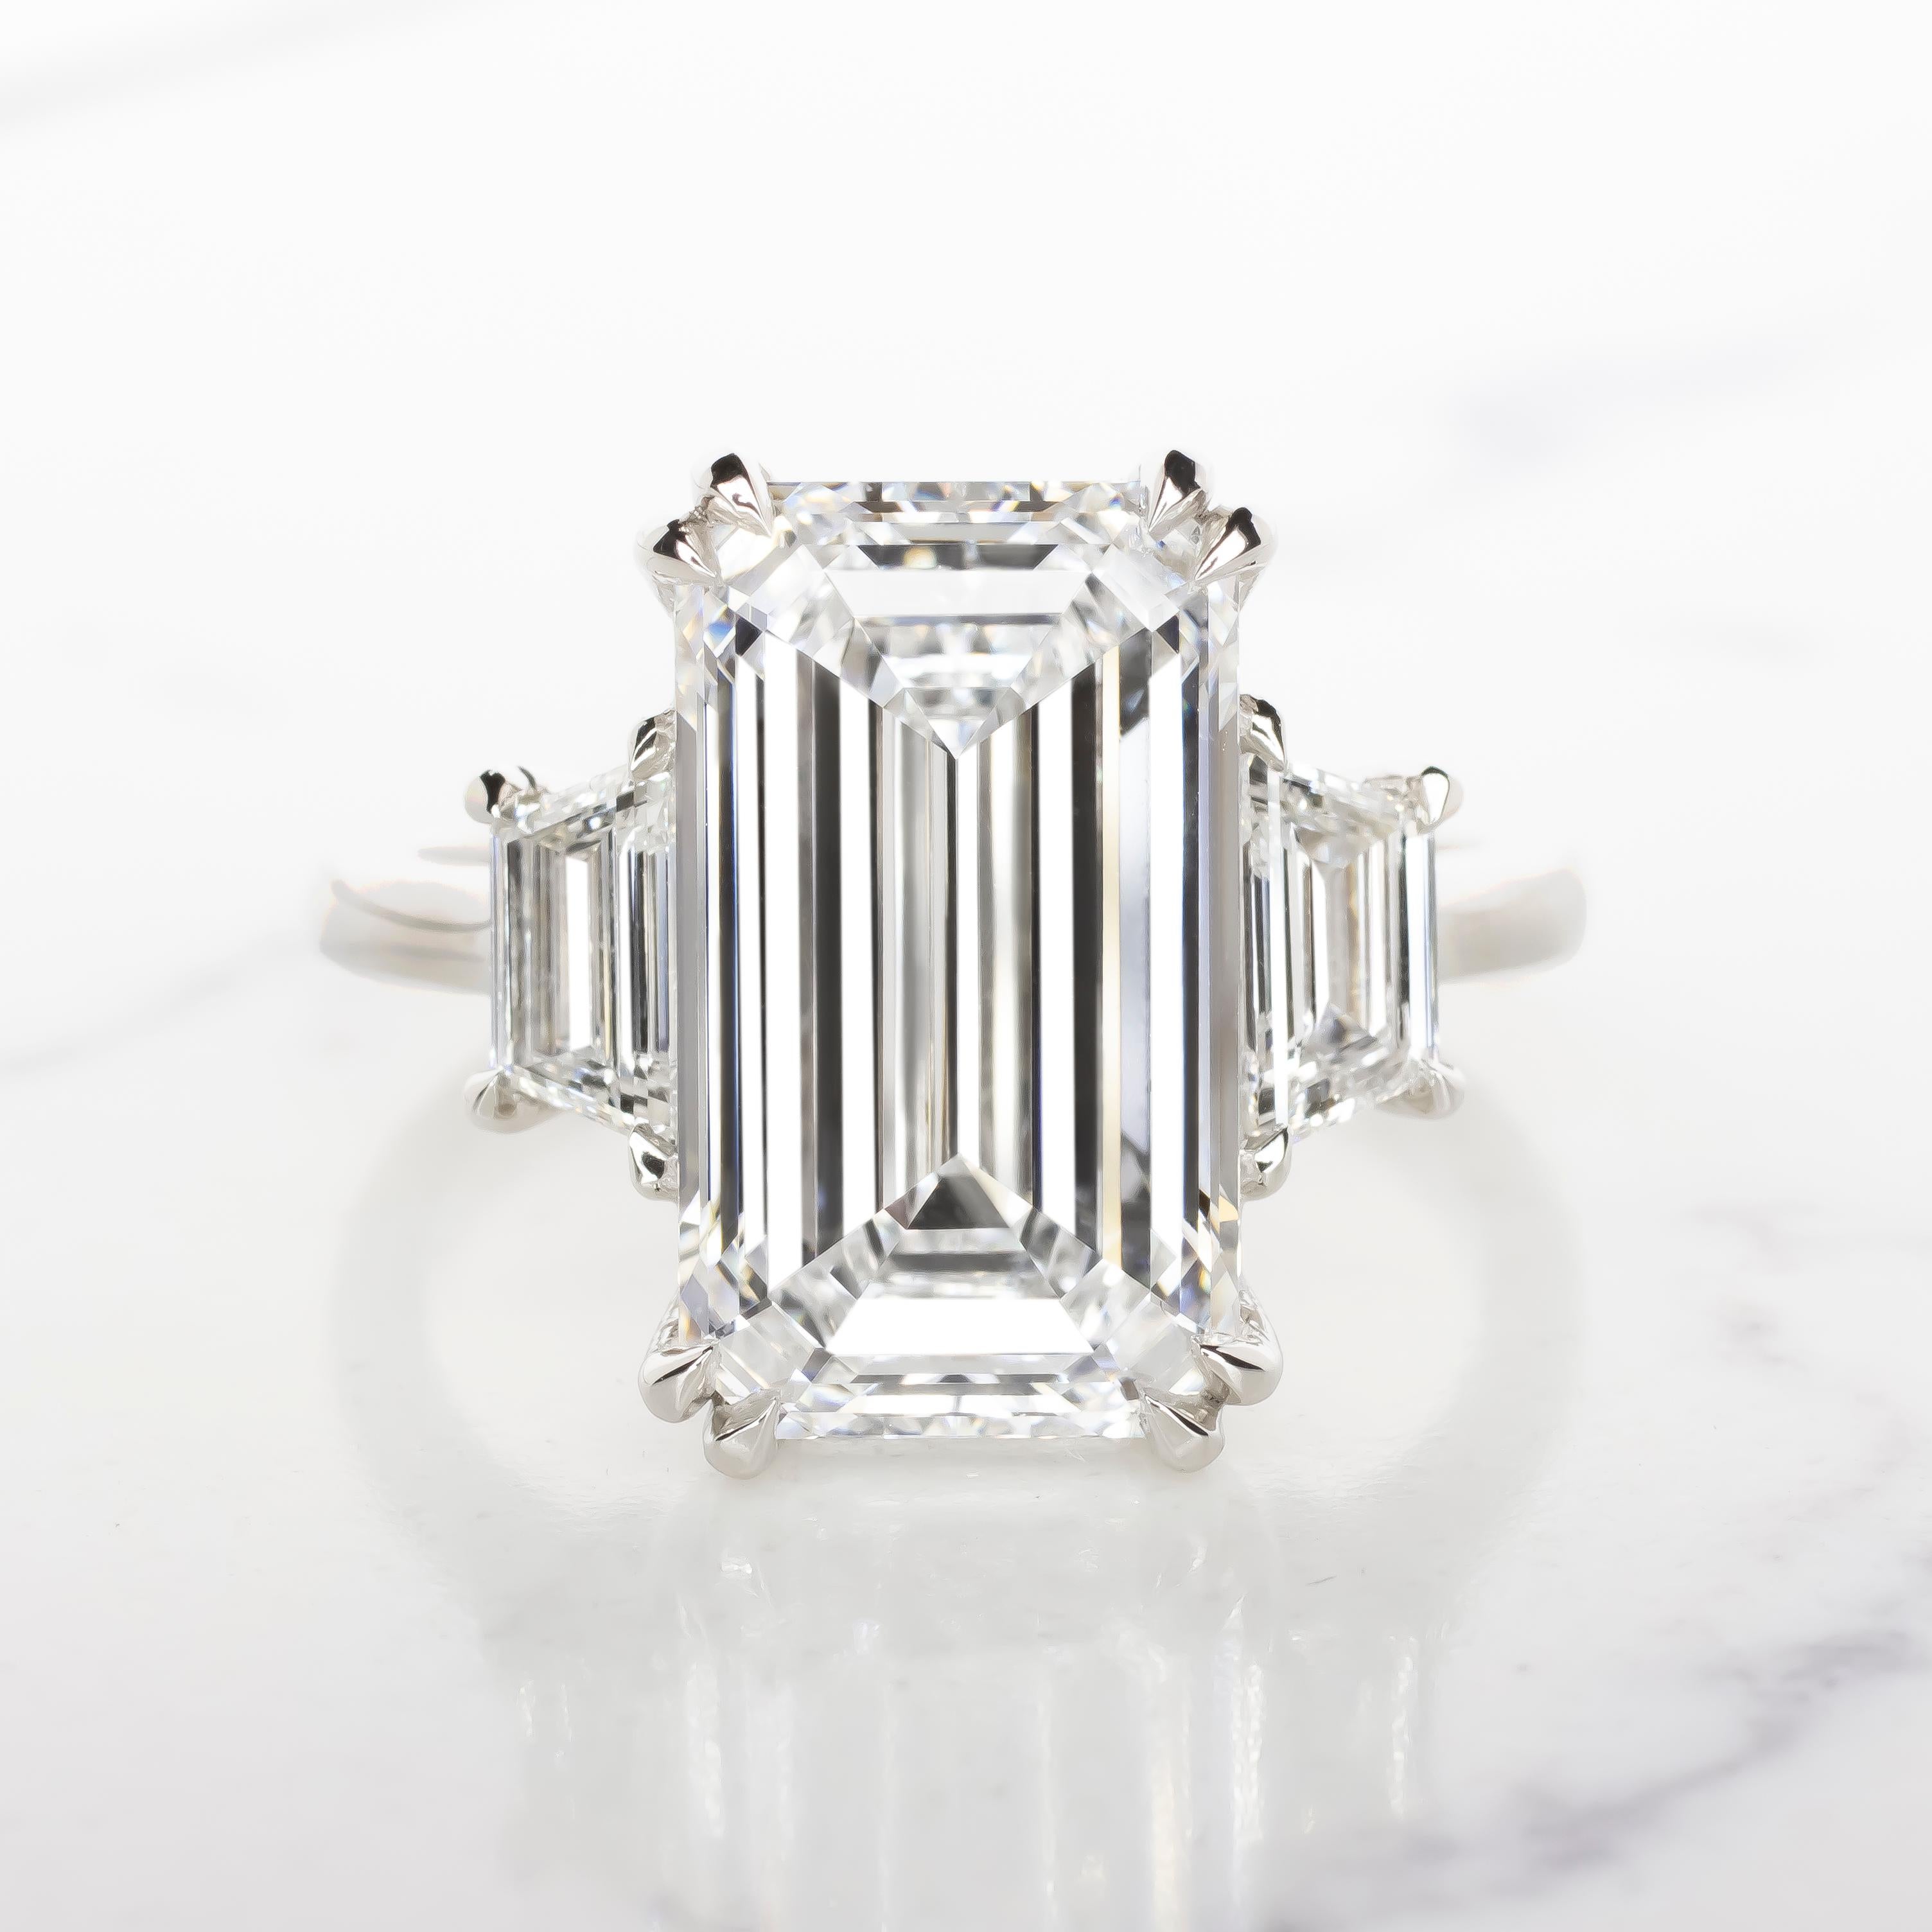 Elevate your style to the epitome of luxury with this Type IIA Golconda D Color GIA Certified 6 Carat Emerald Cut Diamond Ring. At its core gleams a magnificent emerald-cut diamond of unparalleled quality, boasting the rarest and most coveted